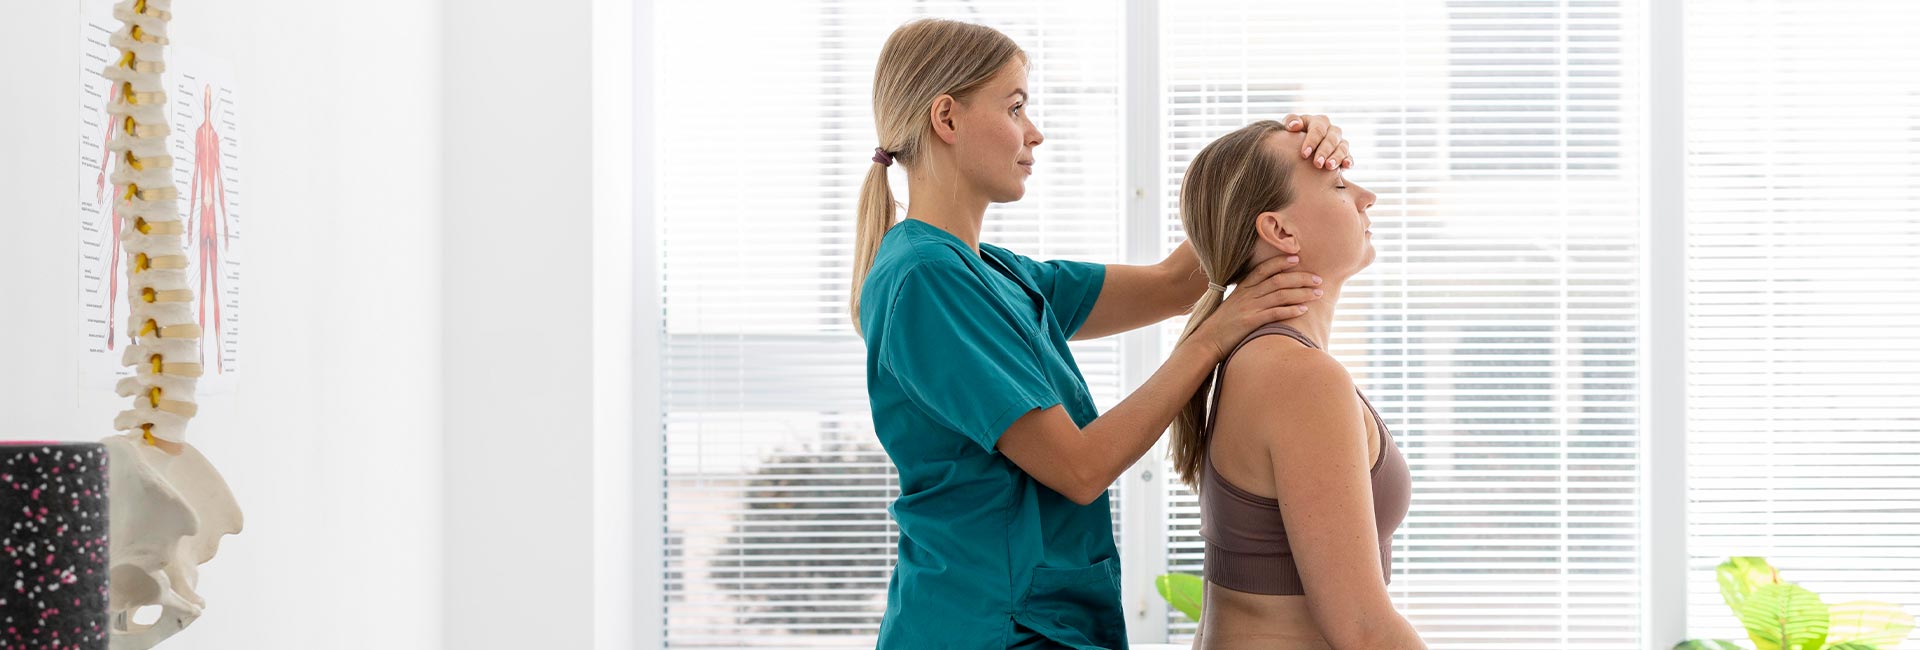 A medical provider works on a patient's neck in a medical office